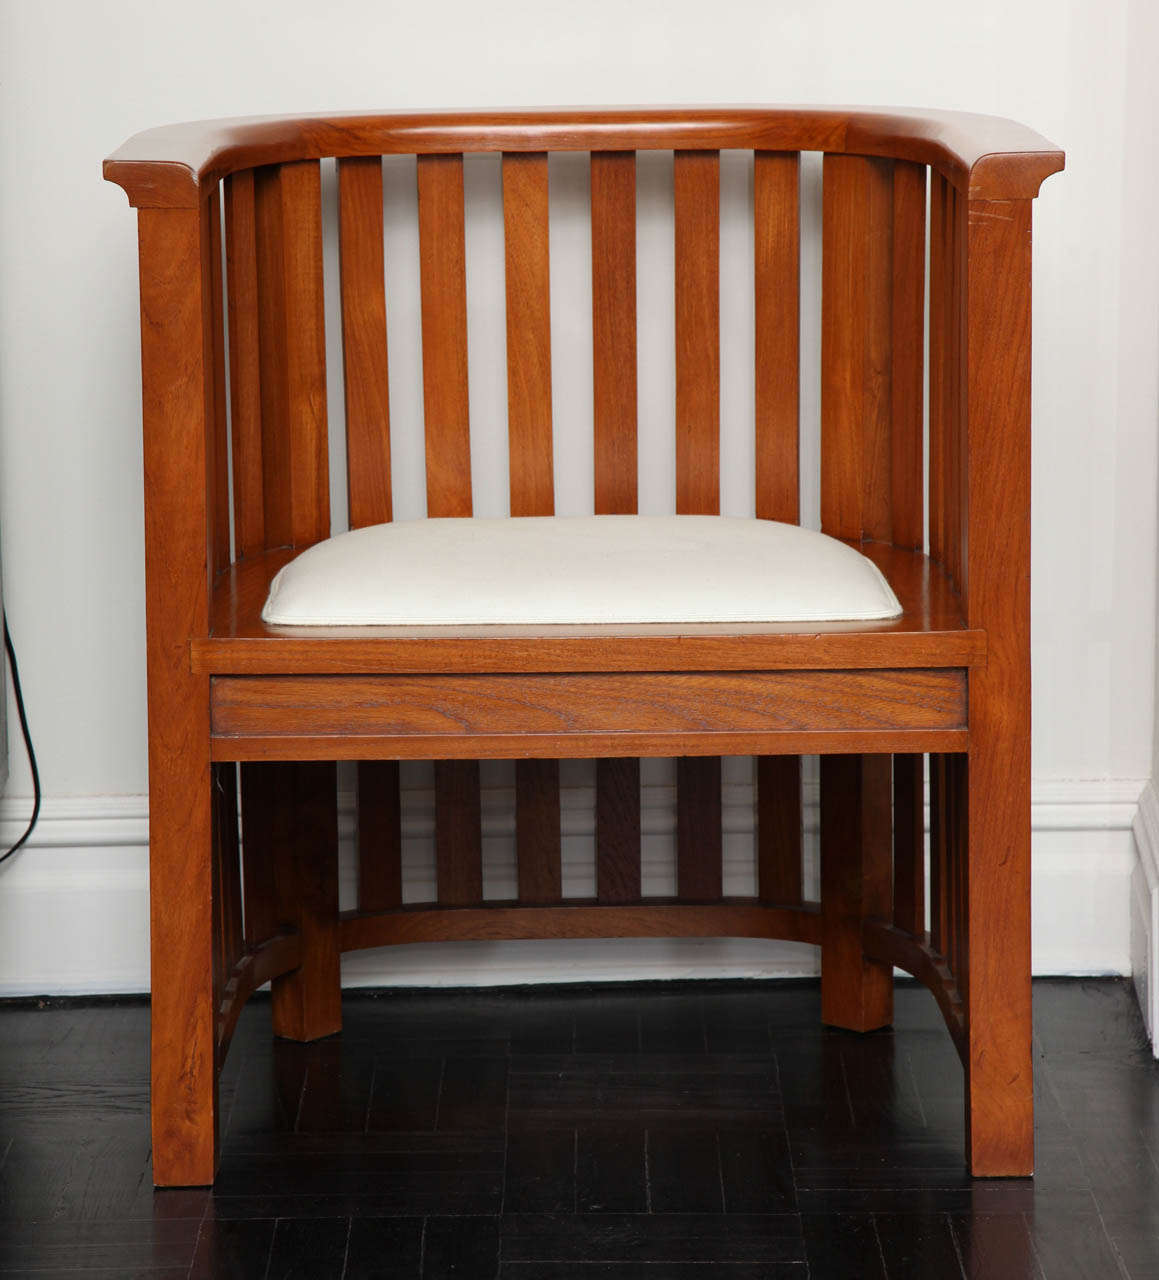 Pair of 20th century cherrywood slatted chairs, curved top rail, square legs.